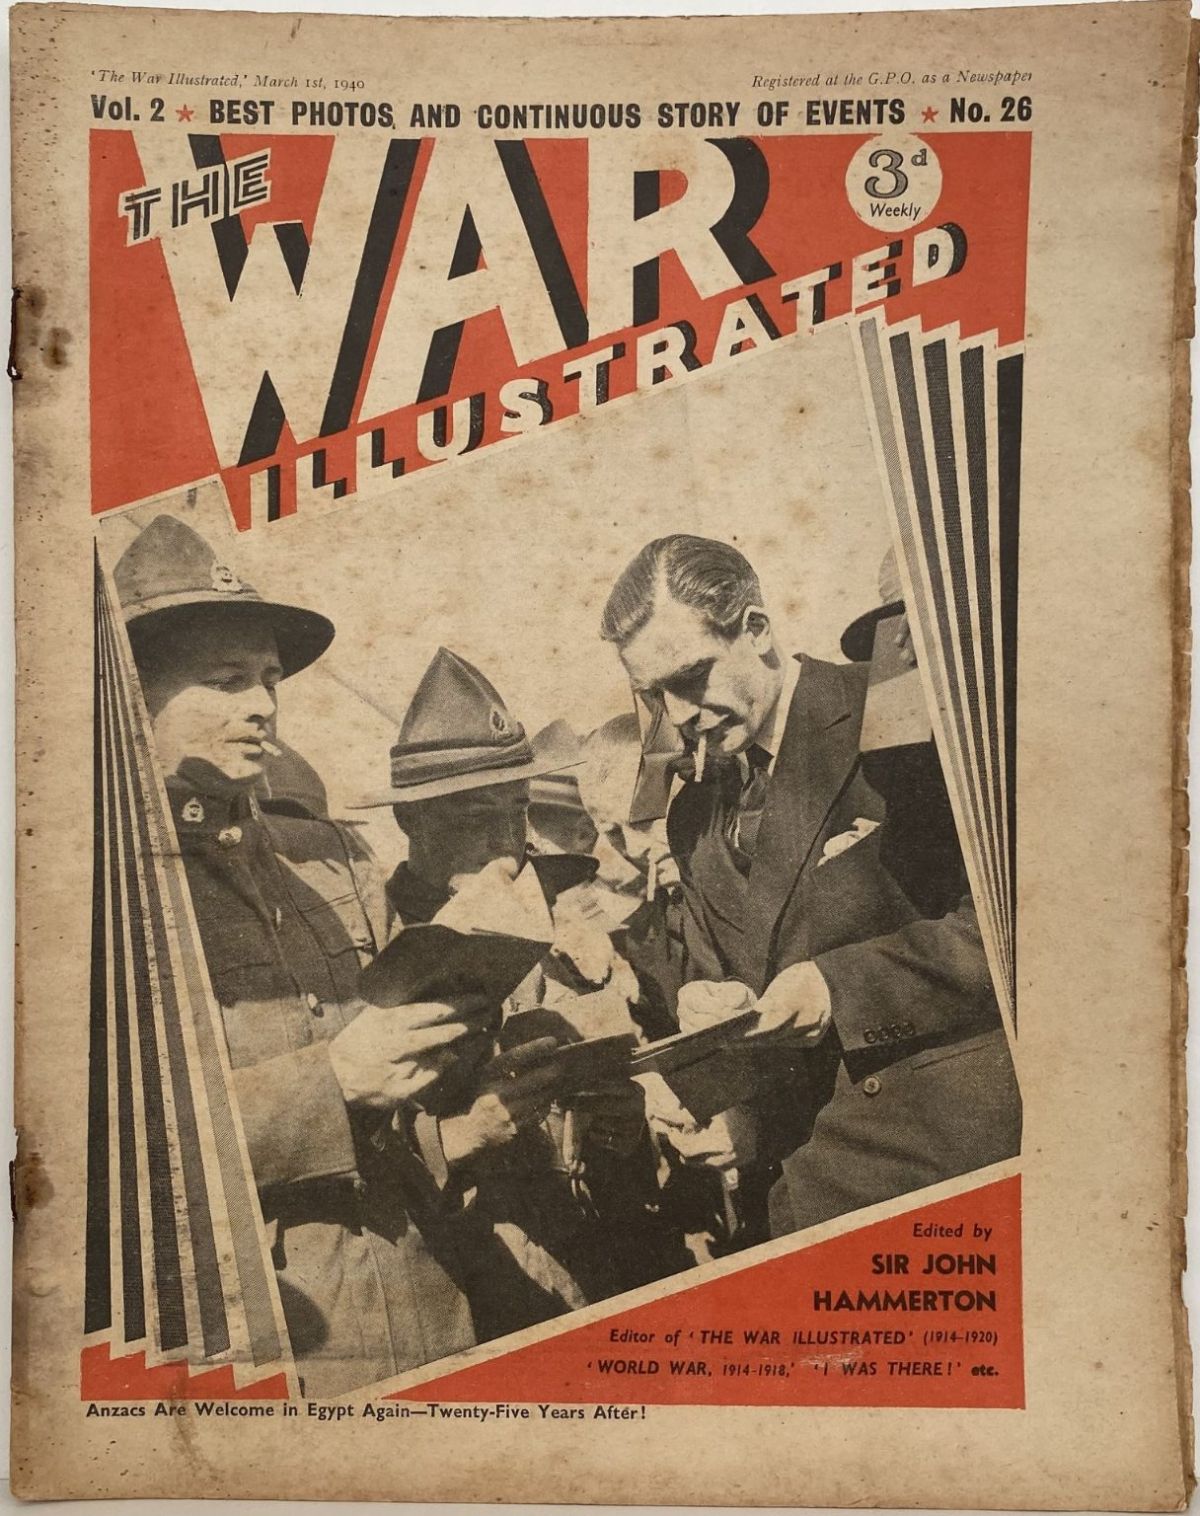 THE WAR ILLUSTRATED - Vol 2, No 26, 1st March 1940